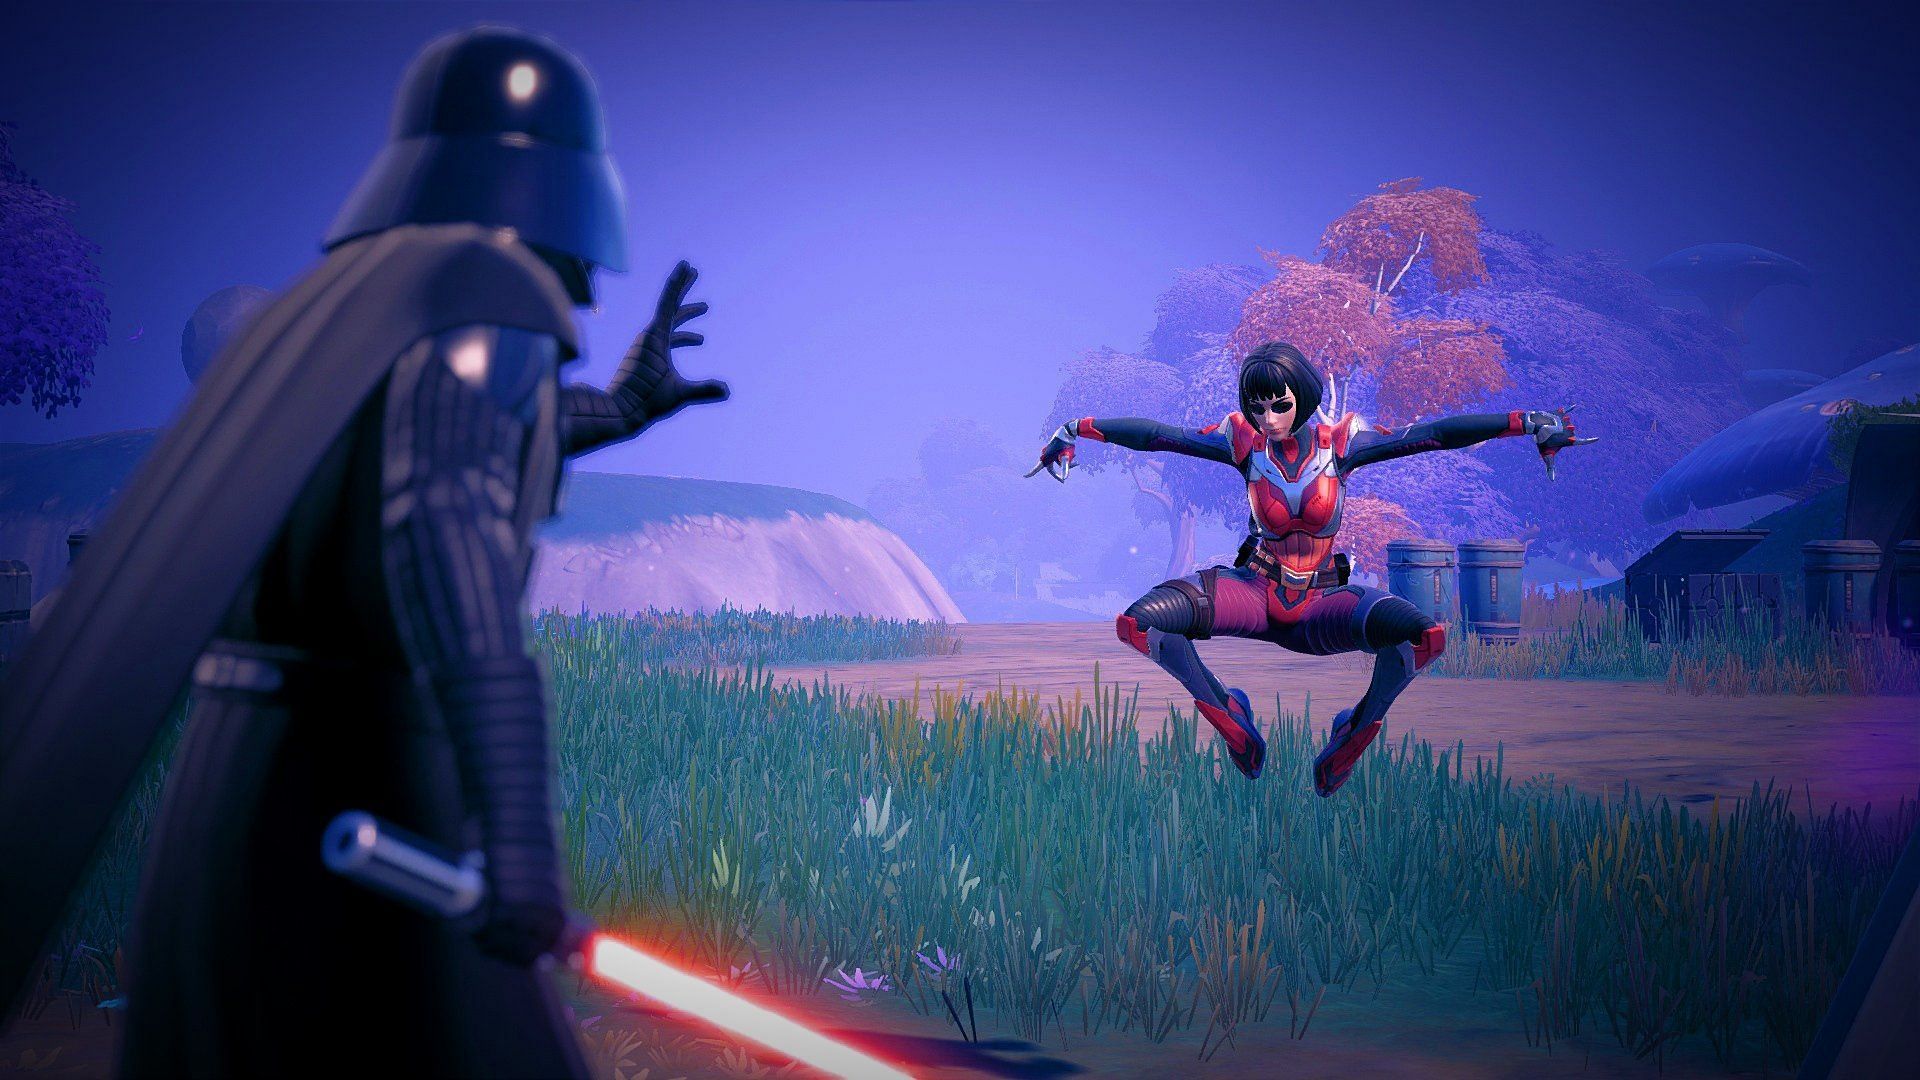 &ldquo;BR was ignored. It&rsquo;s all in the LEGO mode&rdquo;: Fortnite community is disappointed with this year&rsquo;s Star Wars event